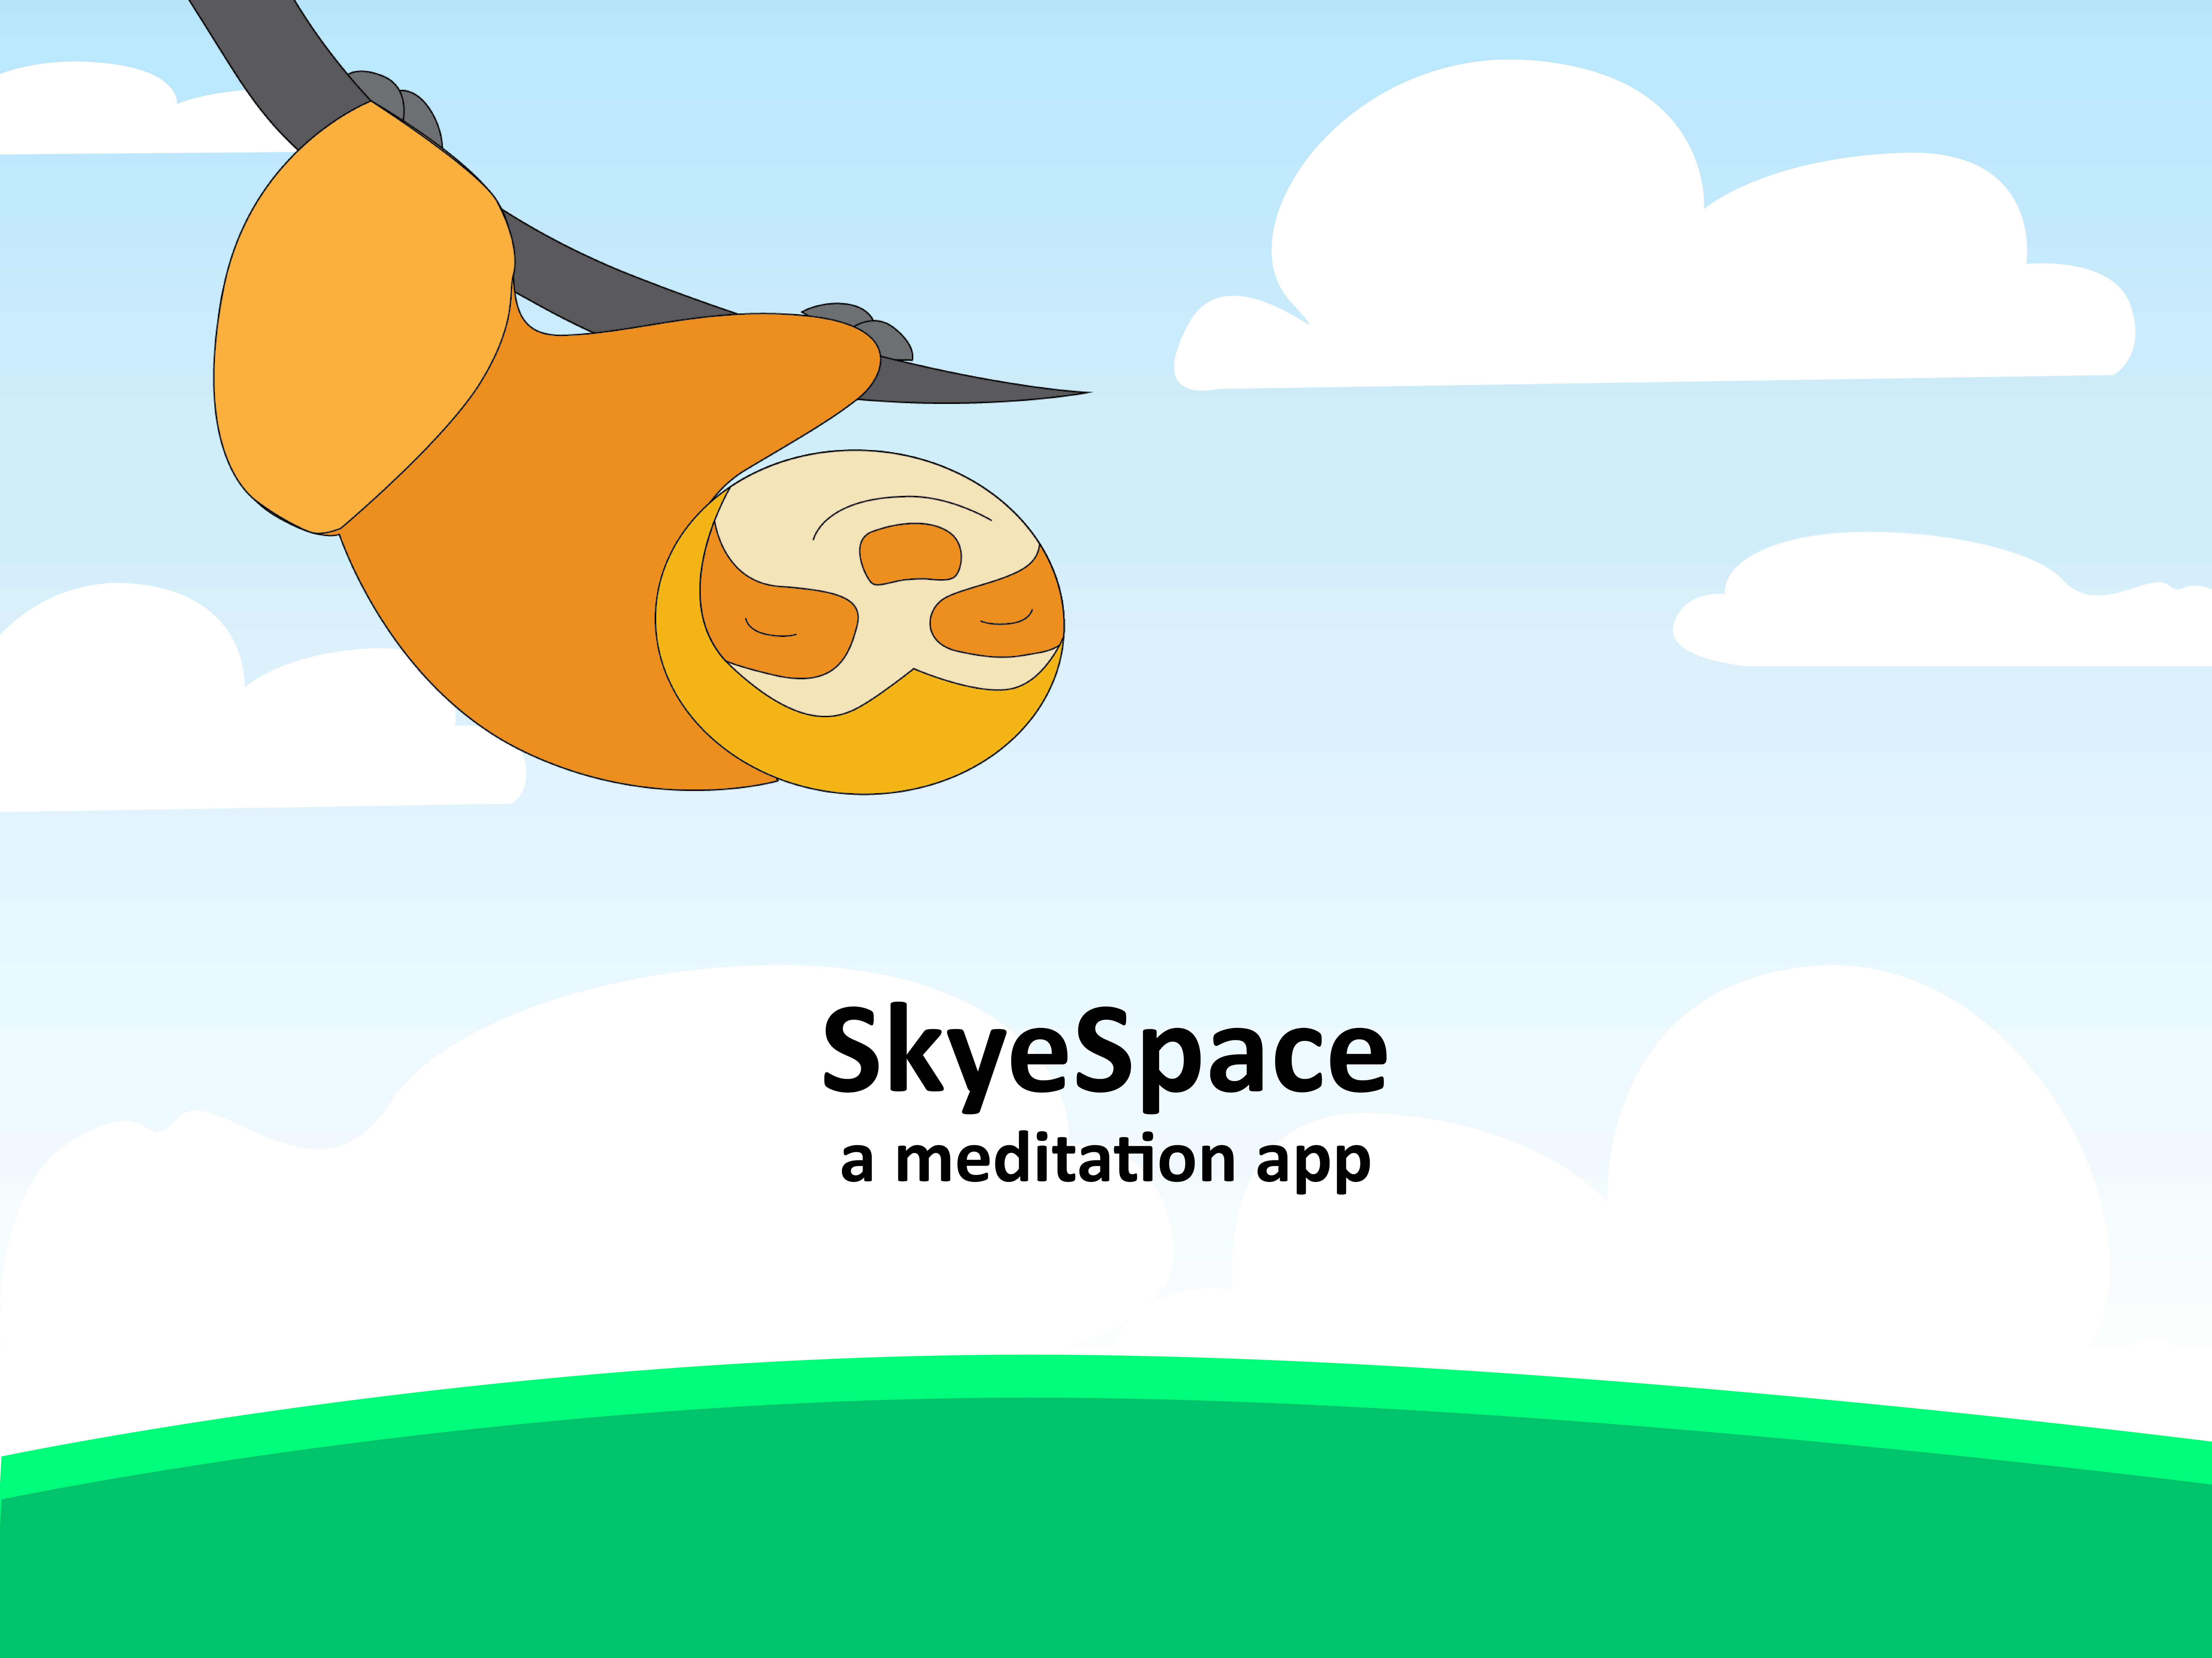 Onboarding for Skyespace